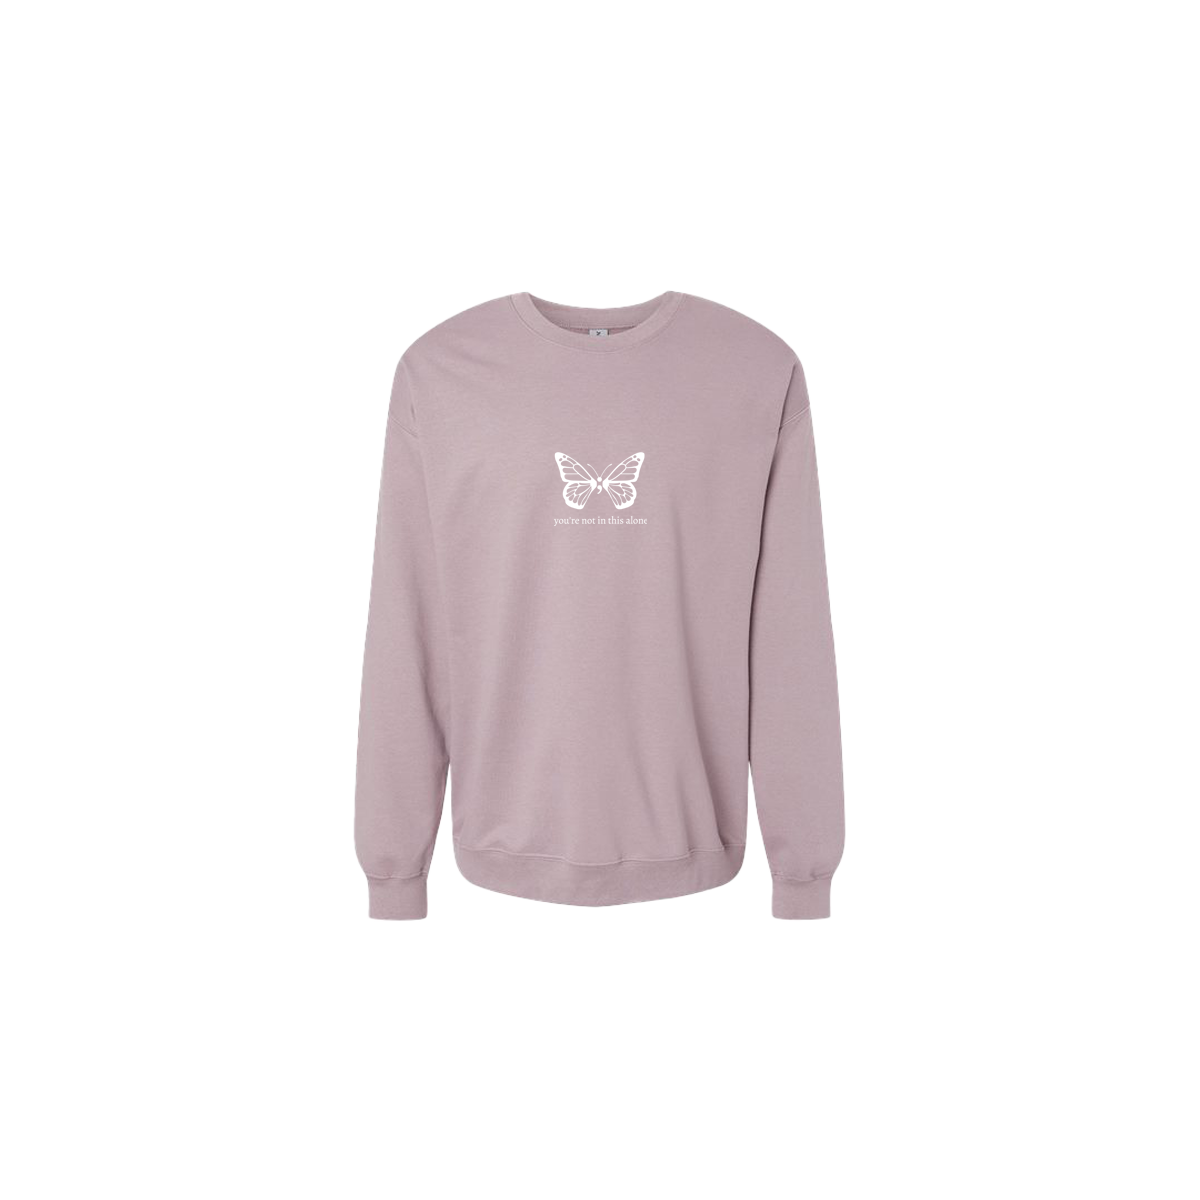 You're Not In This Alone Butterfly Embroidered Mauve Crewneck - Mental Health Awareness Clothing